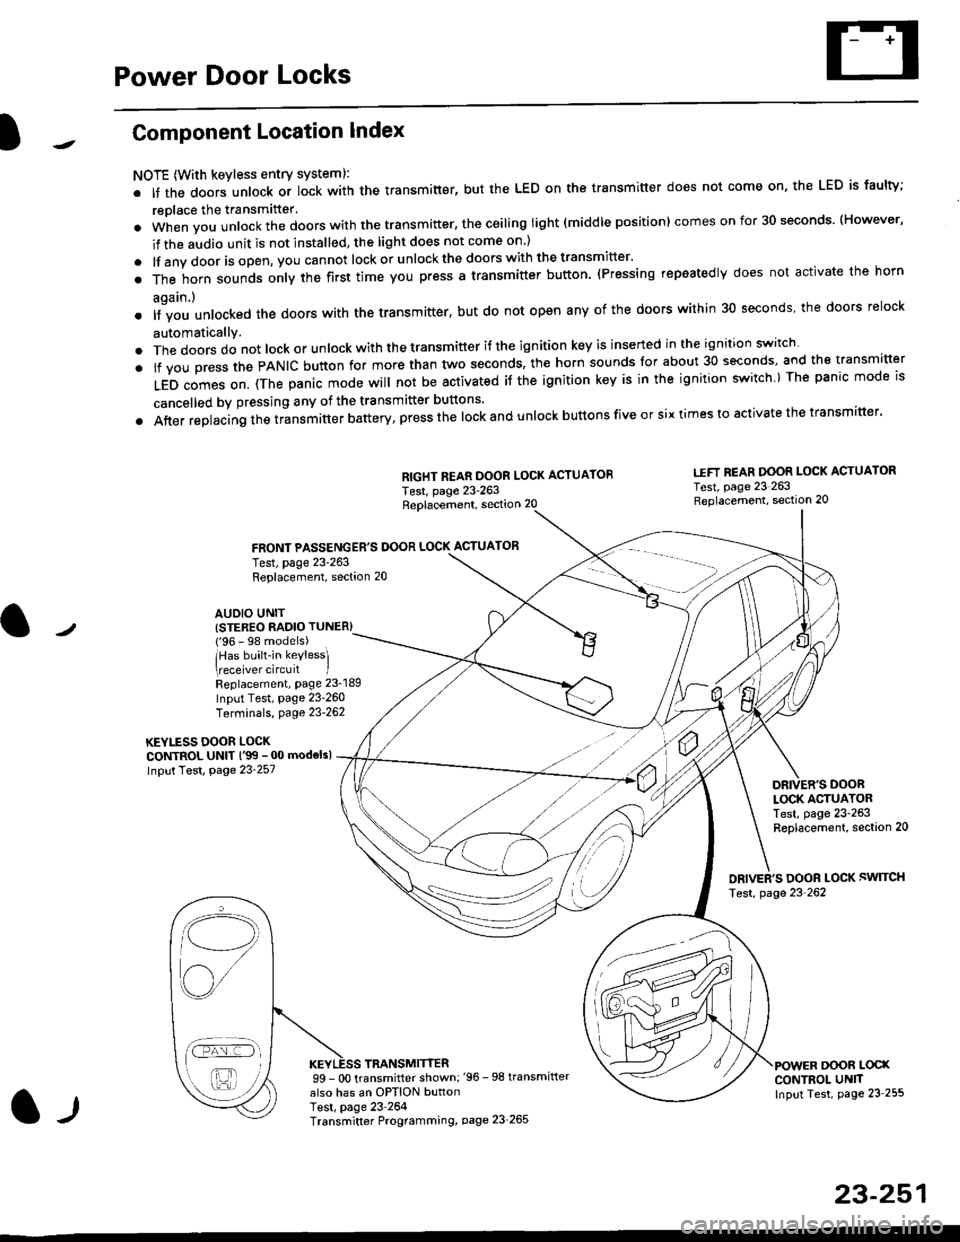 HONDA CIVIC 1996 6.G Owners Manual Power Door Locks
Component Location Index
NOTE (With keyless entry systeml:
. It the doors unlock or lock with the transmitter, but the LED on the transmitter does not come on, the LED is faulty;
repl